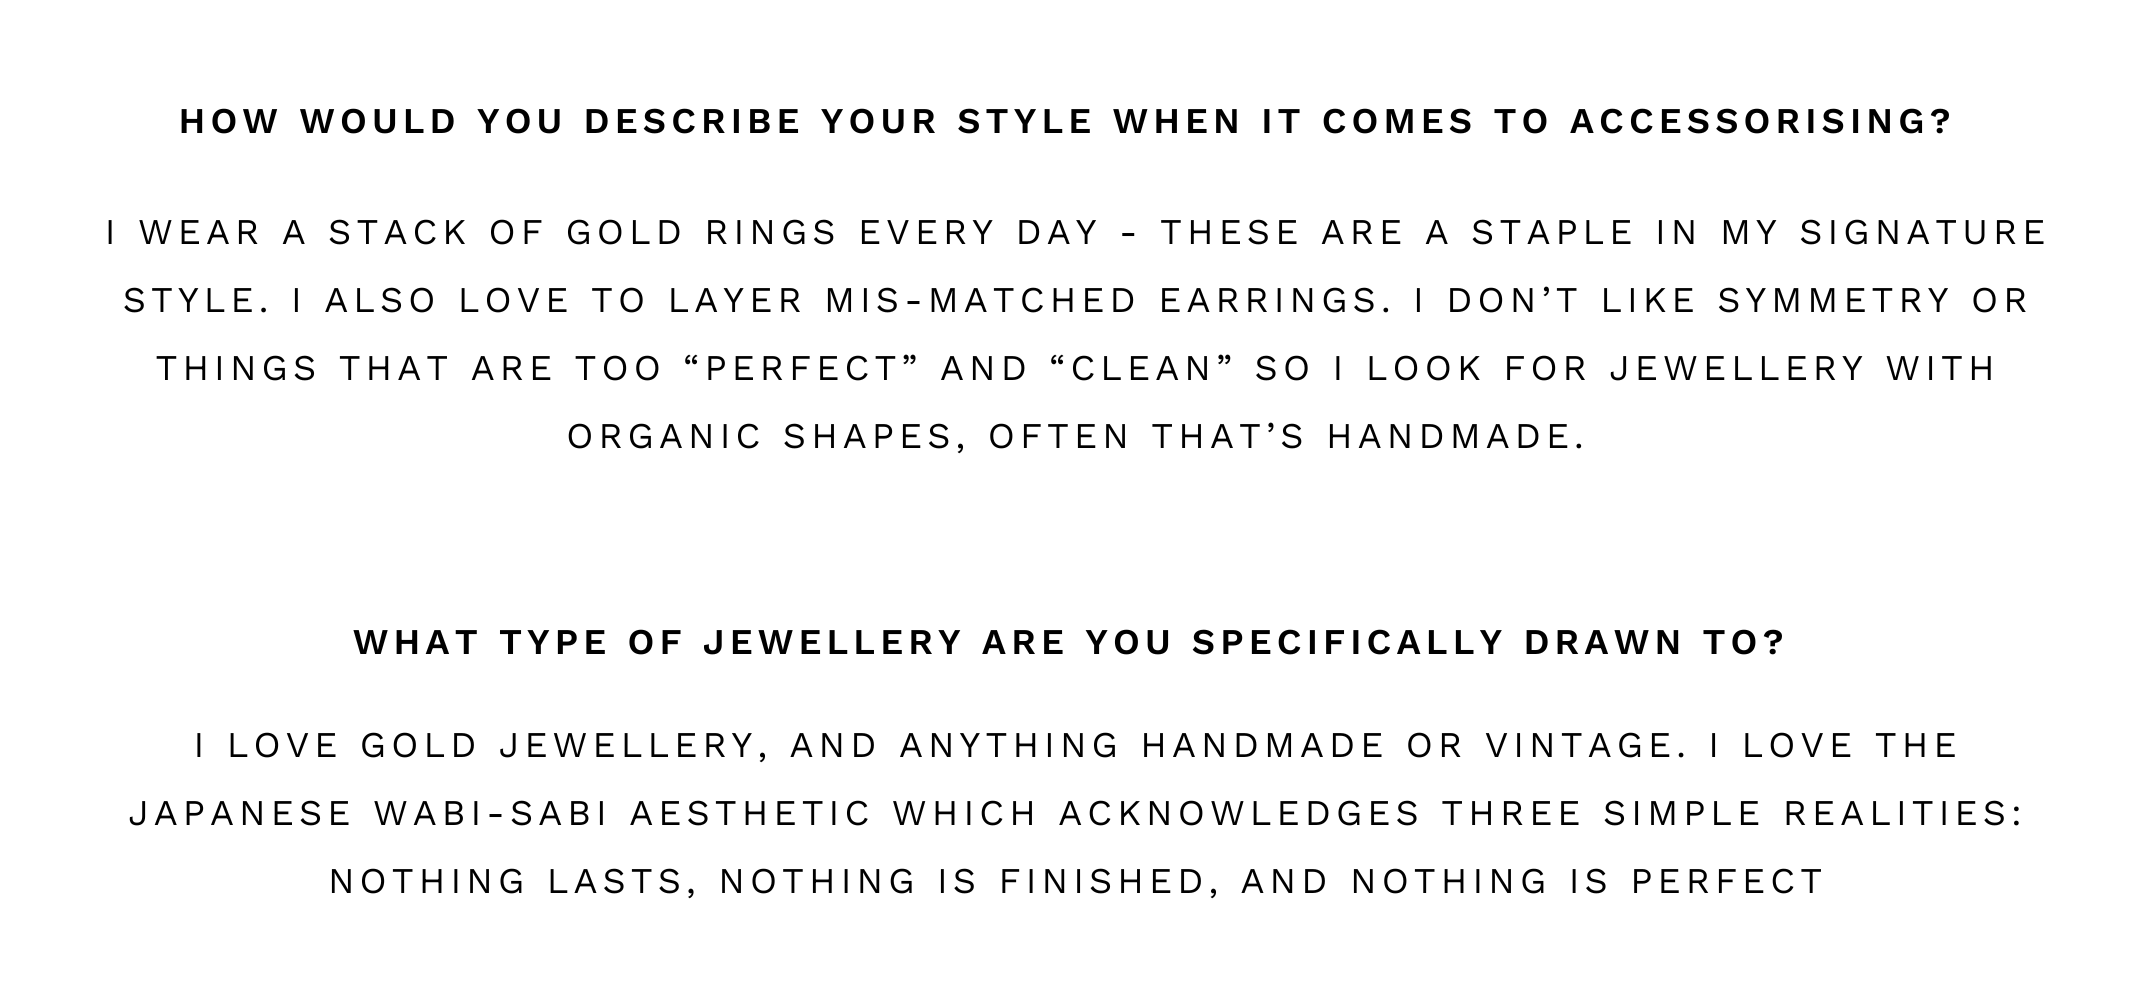 I love gold jewellery, and anything handmade or vintage. I love the Japanese wabi-sabi aesthetic which acknowledges three simple realities: nothing lasts, nothing is finished, and nothing is perfect